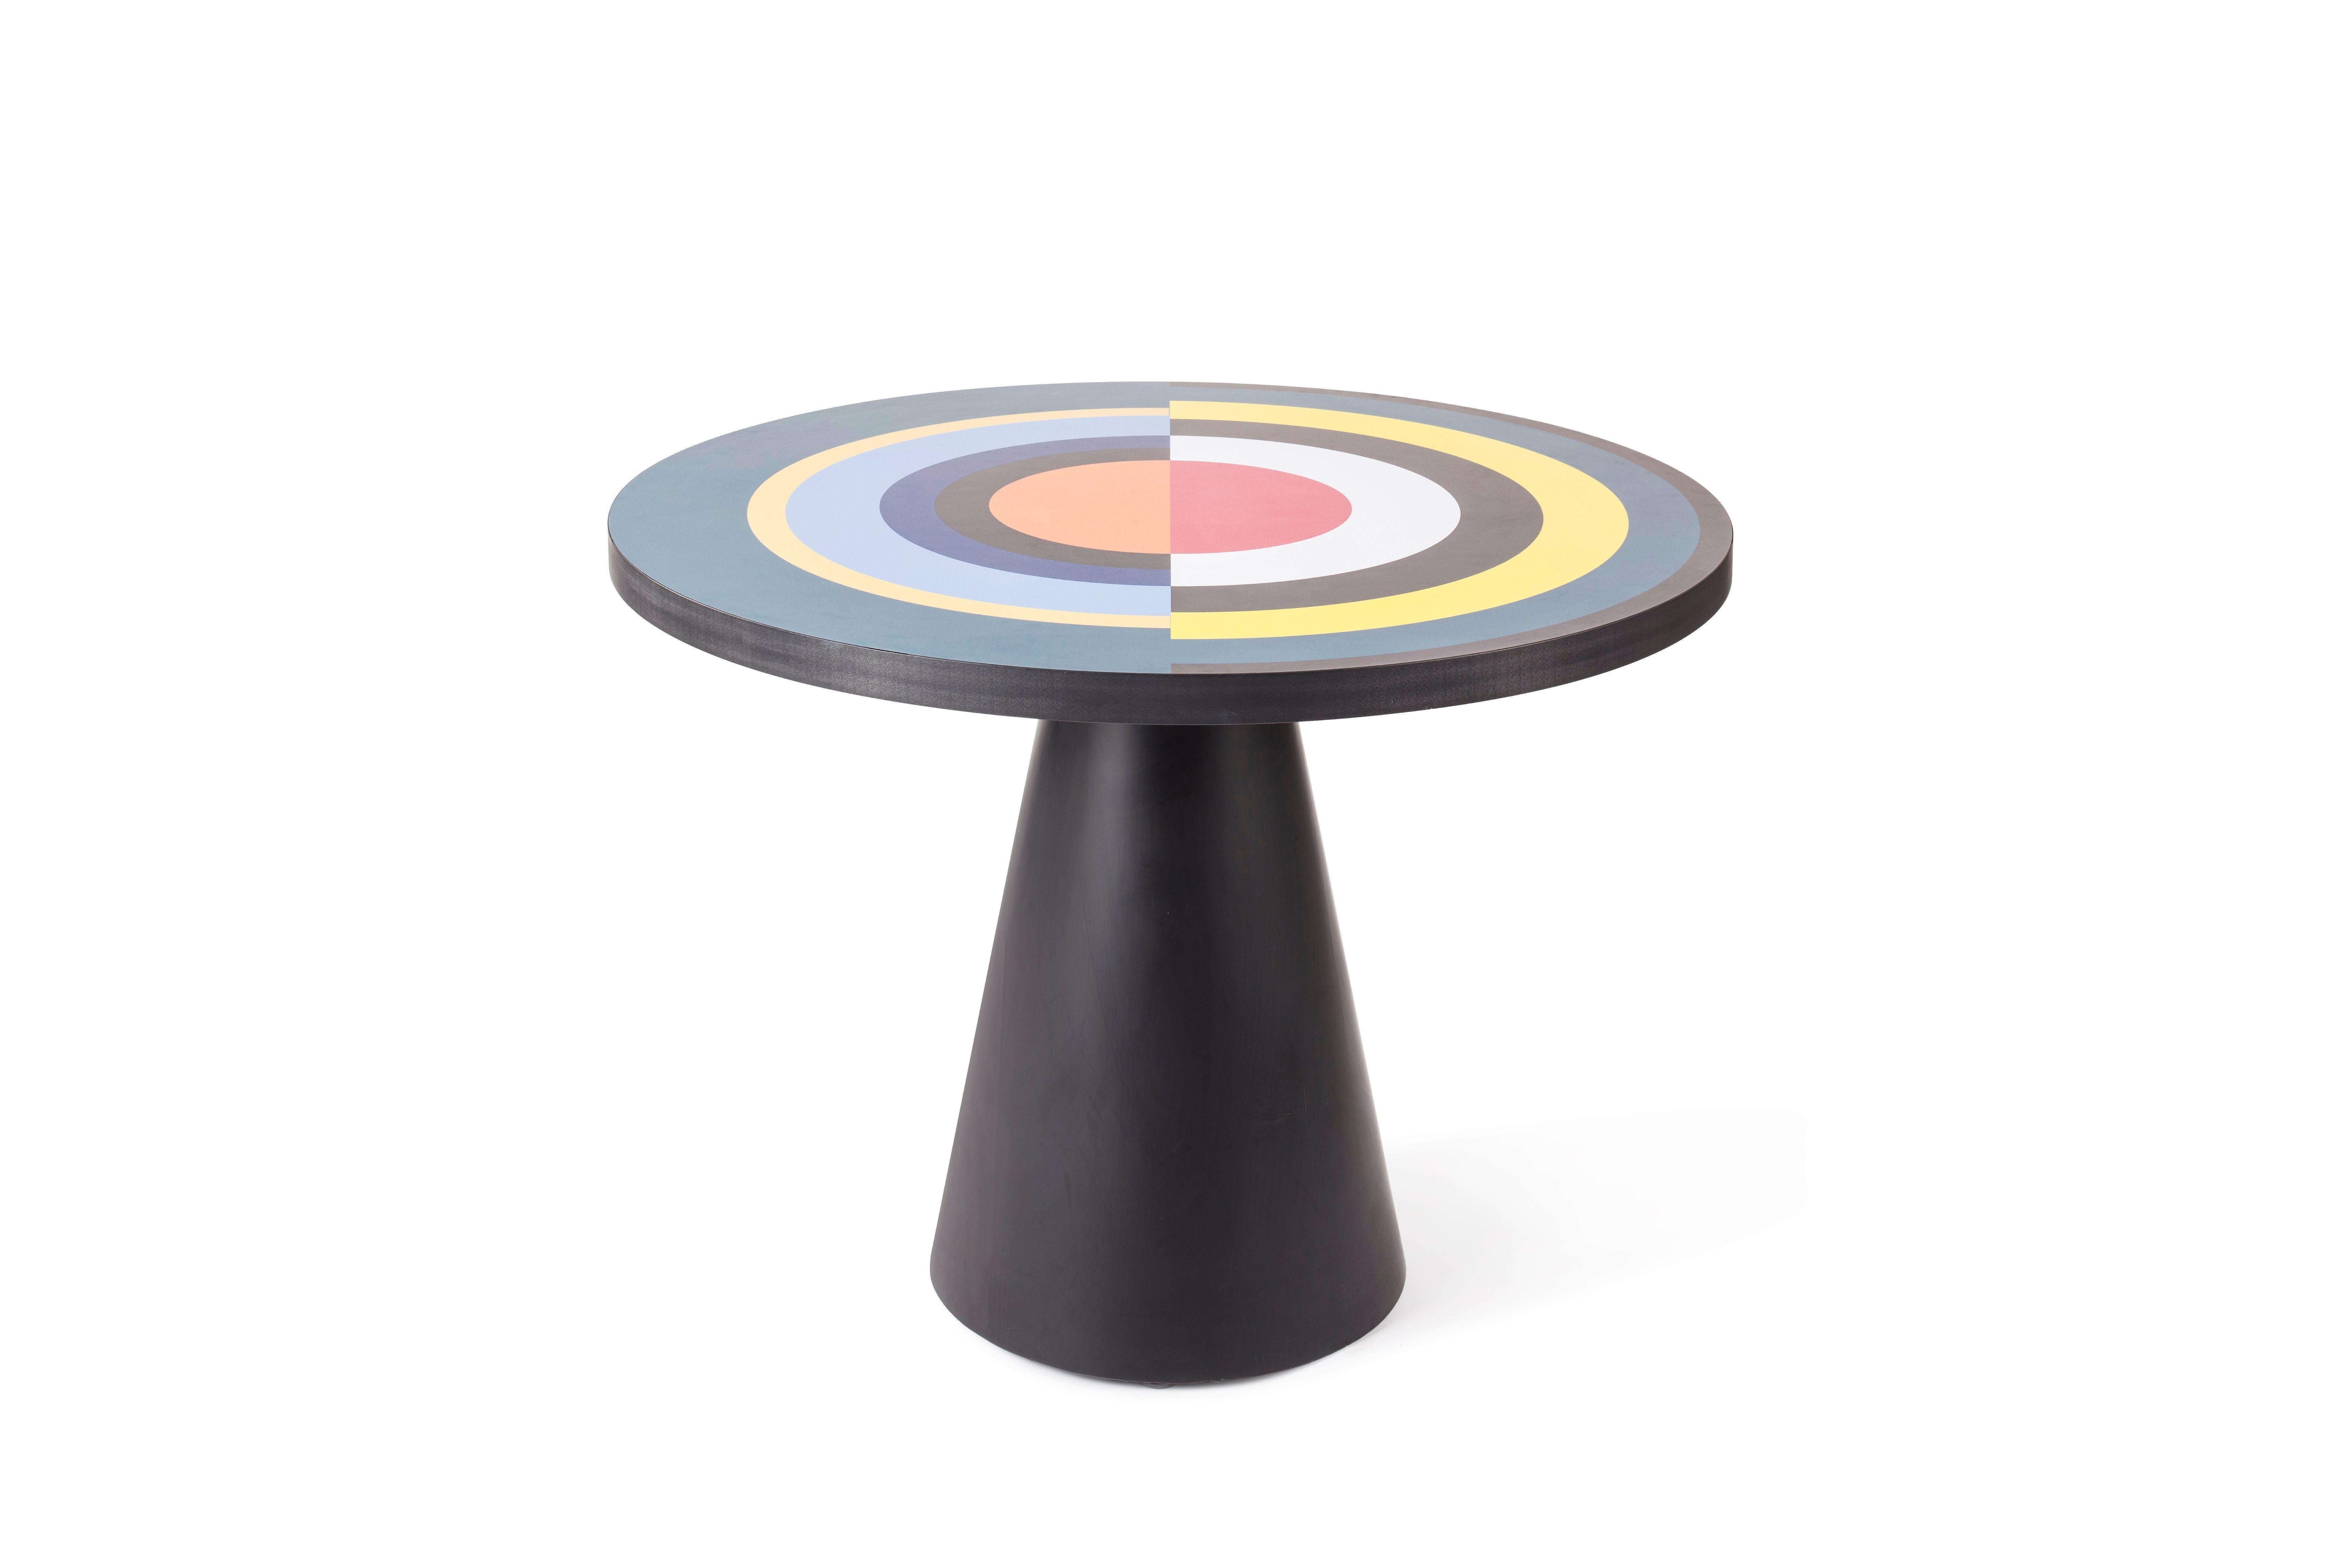 Homage to Delaunay dining table by Thomas Dariel, Maison Dada
Diameter 80 or diameter 100 or diameter 115, height74 cm
Structure in MDF • Base painted in matte color finish
Printed laminate top
Sonia et Cætera pays homage to the famous French